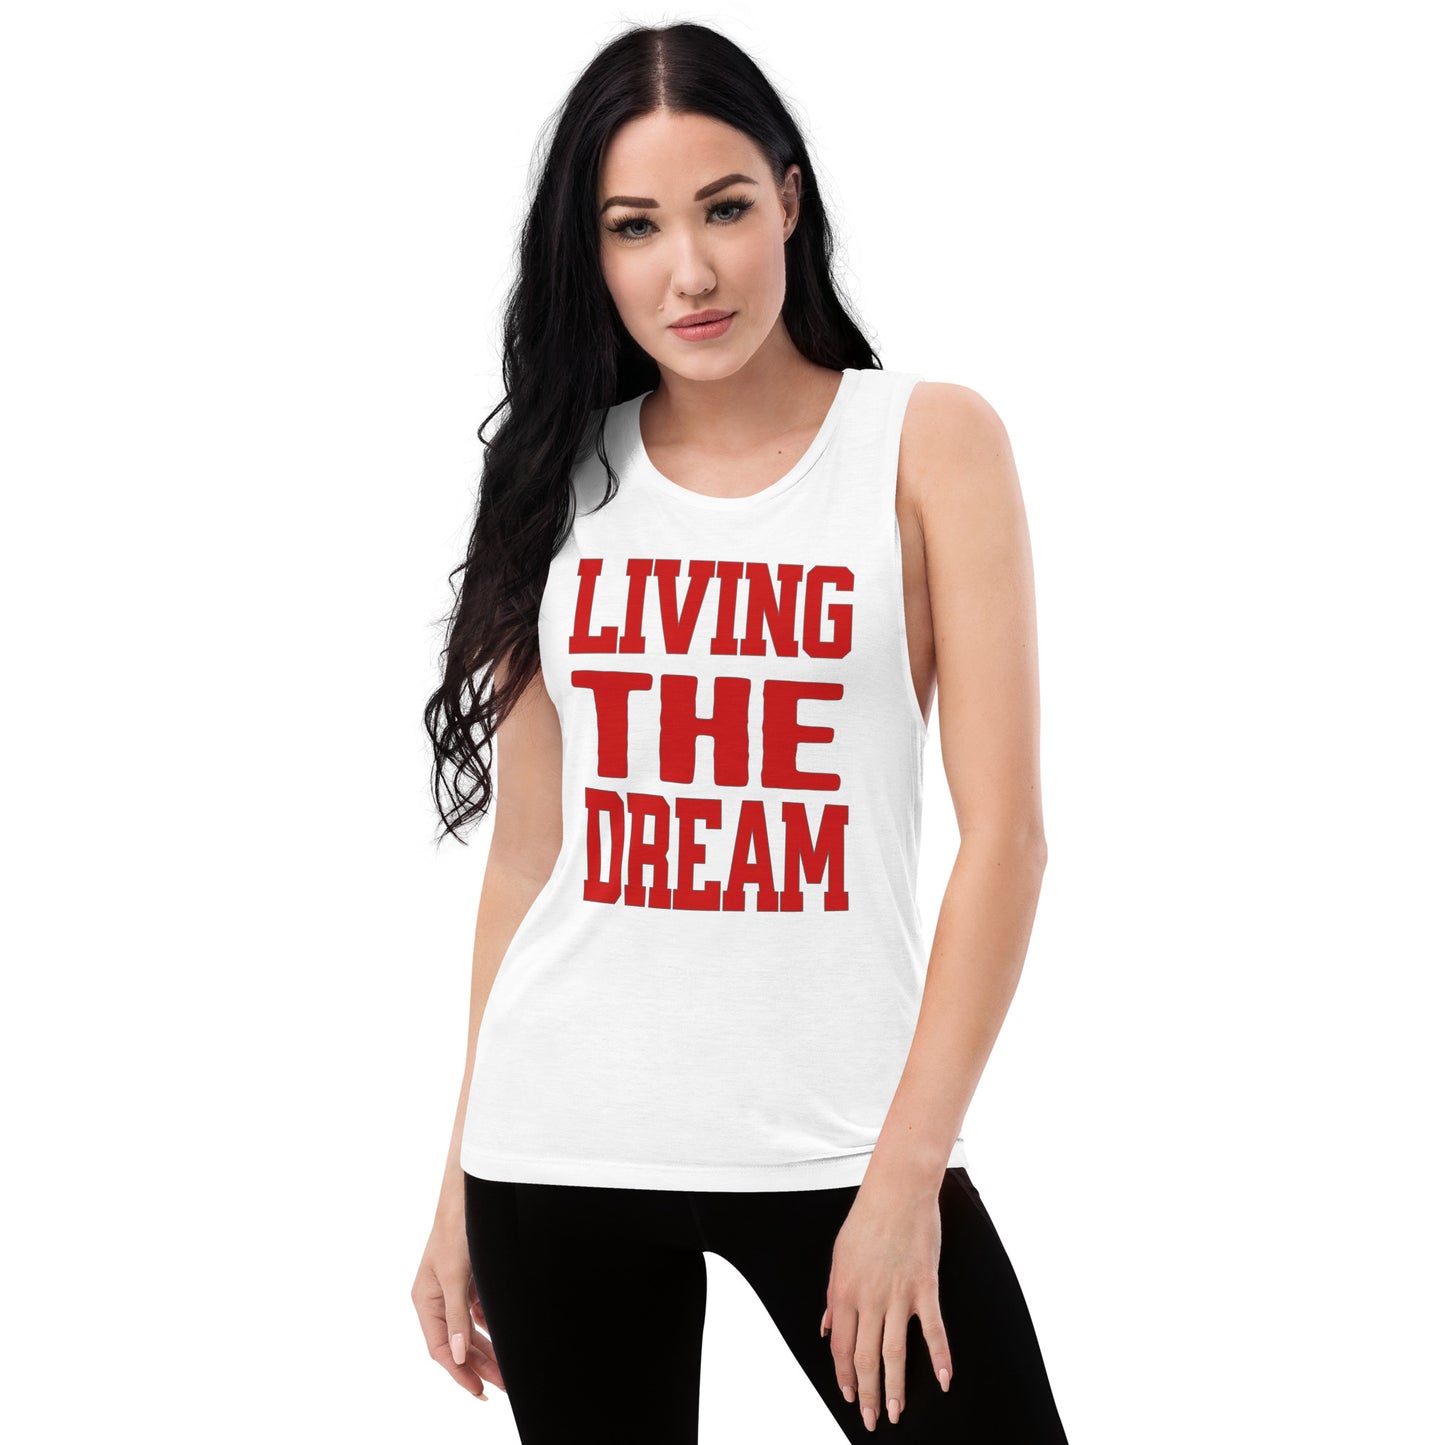 Living the Dream Ladies’ Muscle Tank